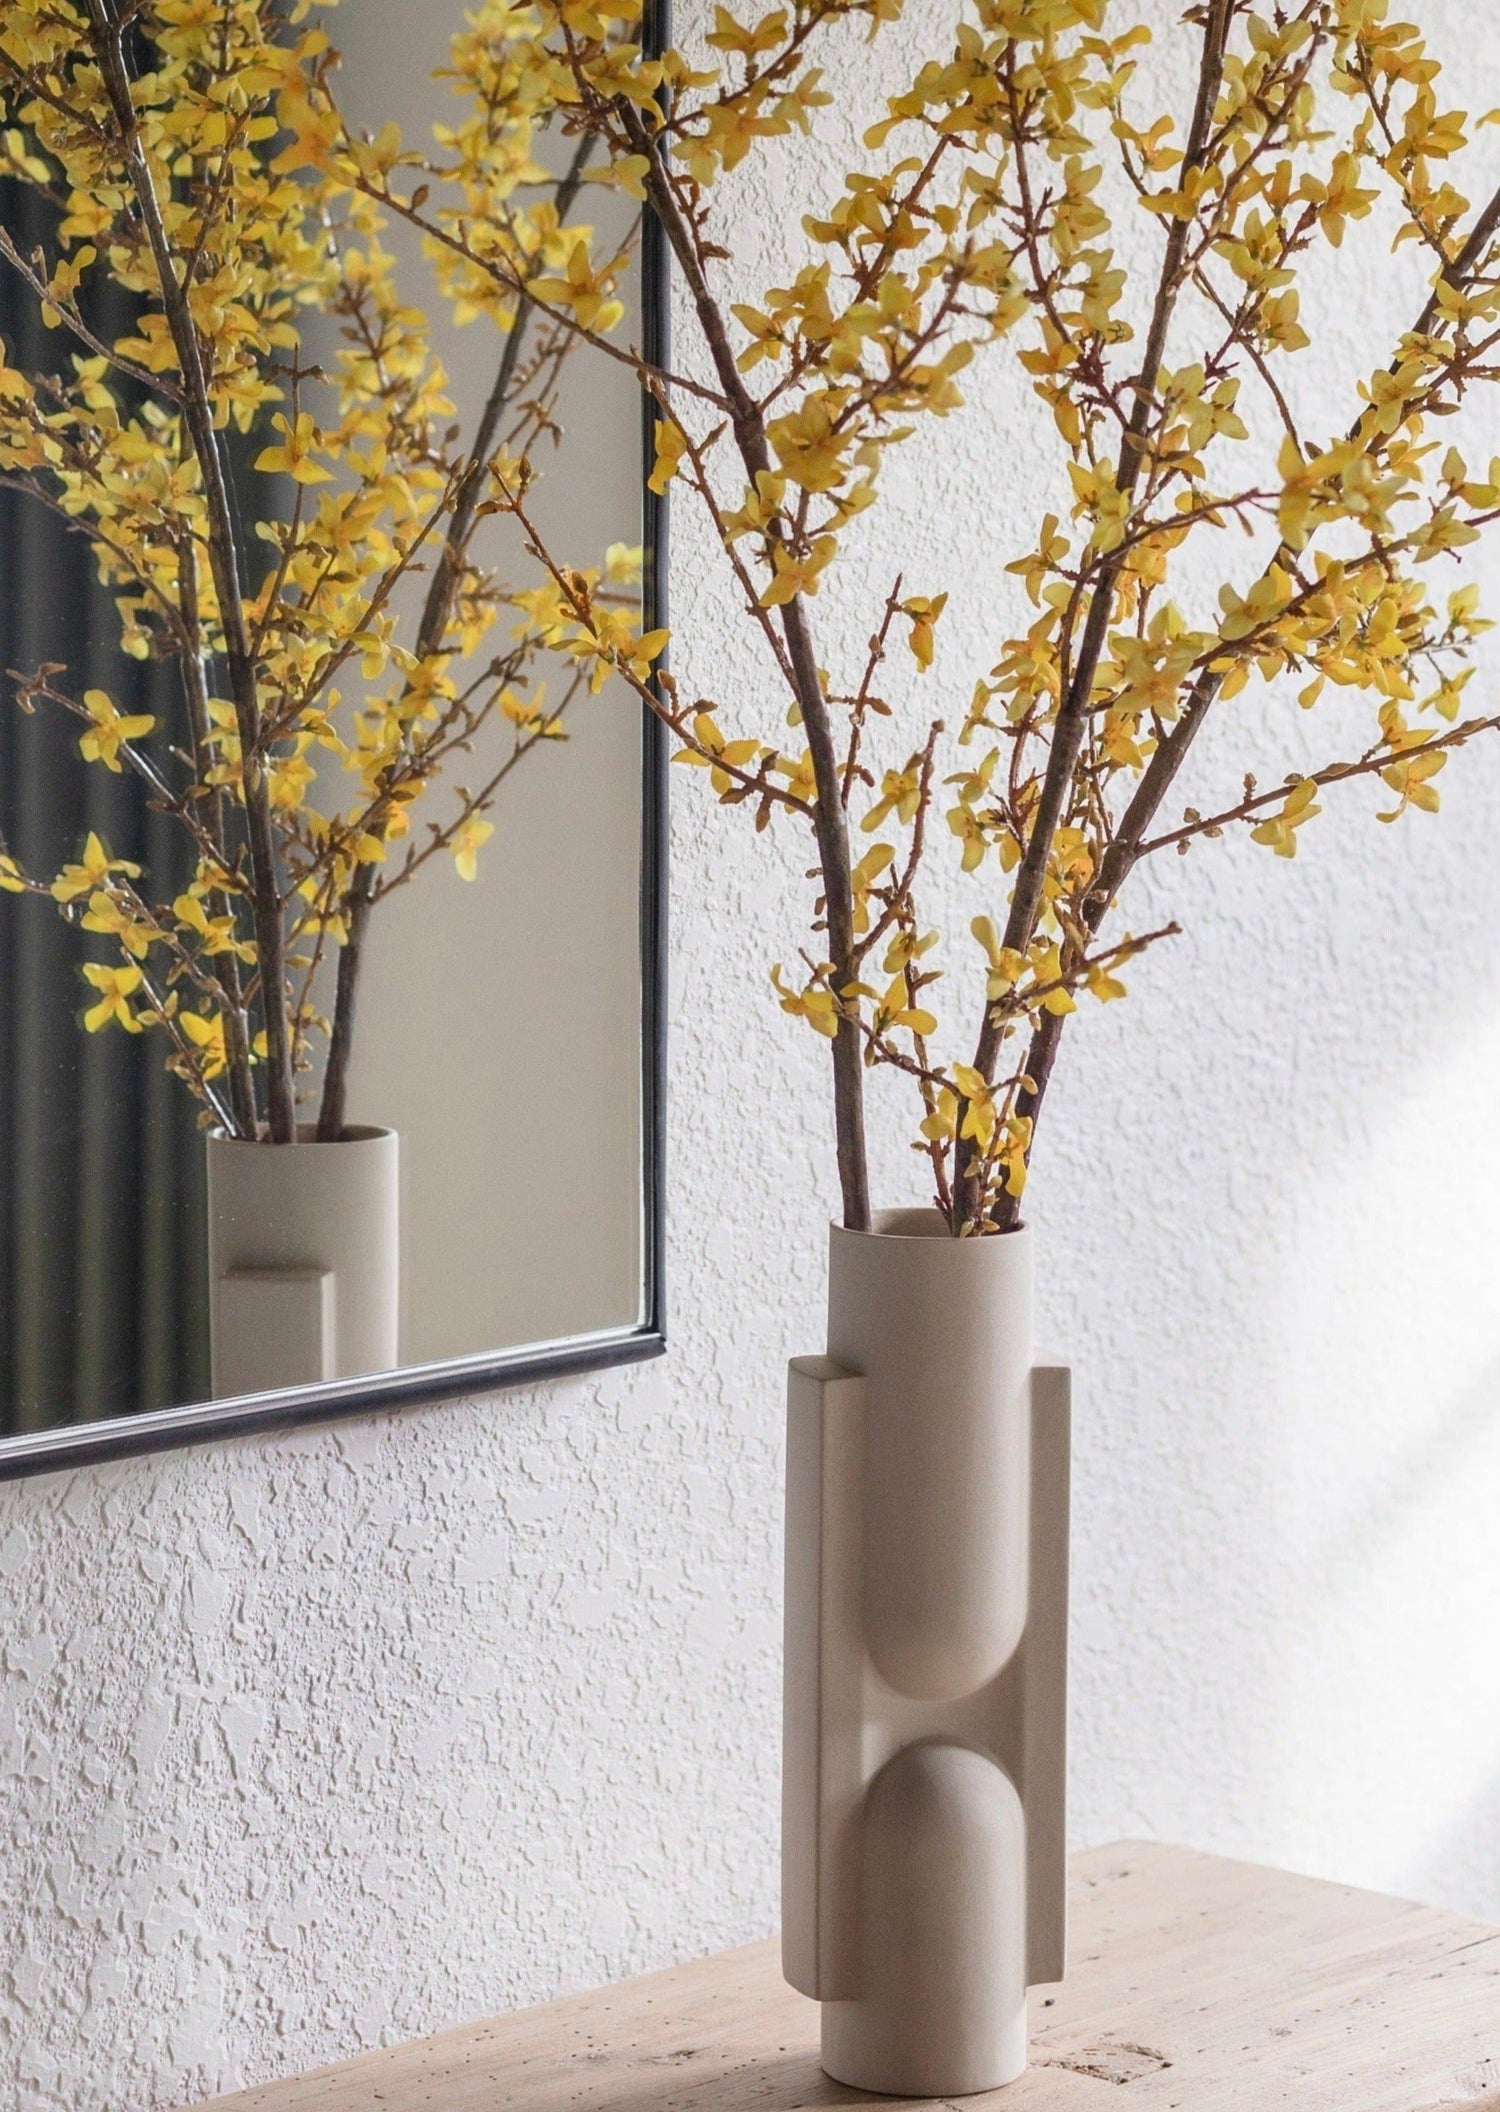 Tall Ceramic Kala Vase Styled with Faux Blooming Forsythia Branch